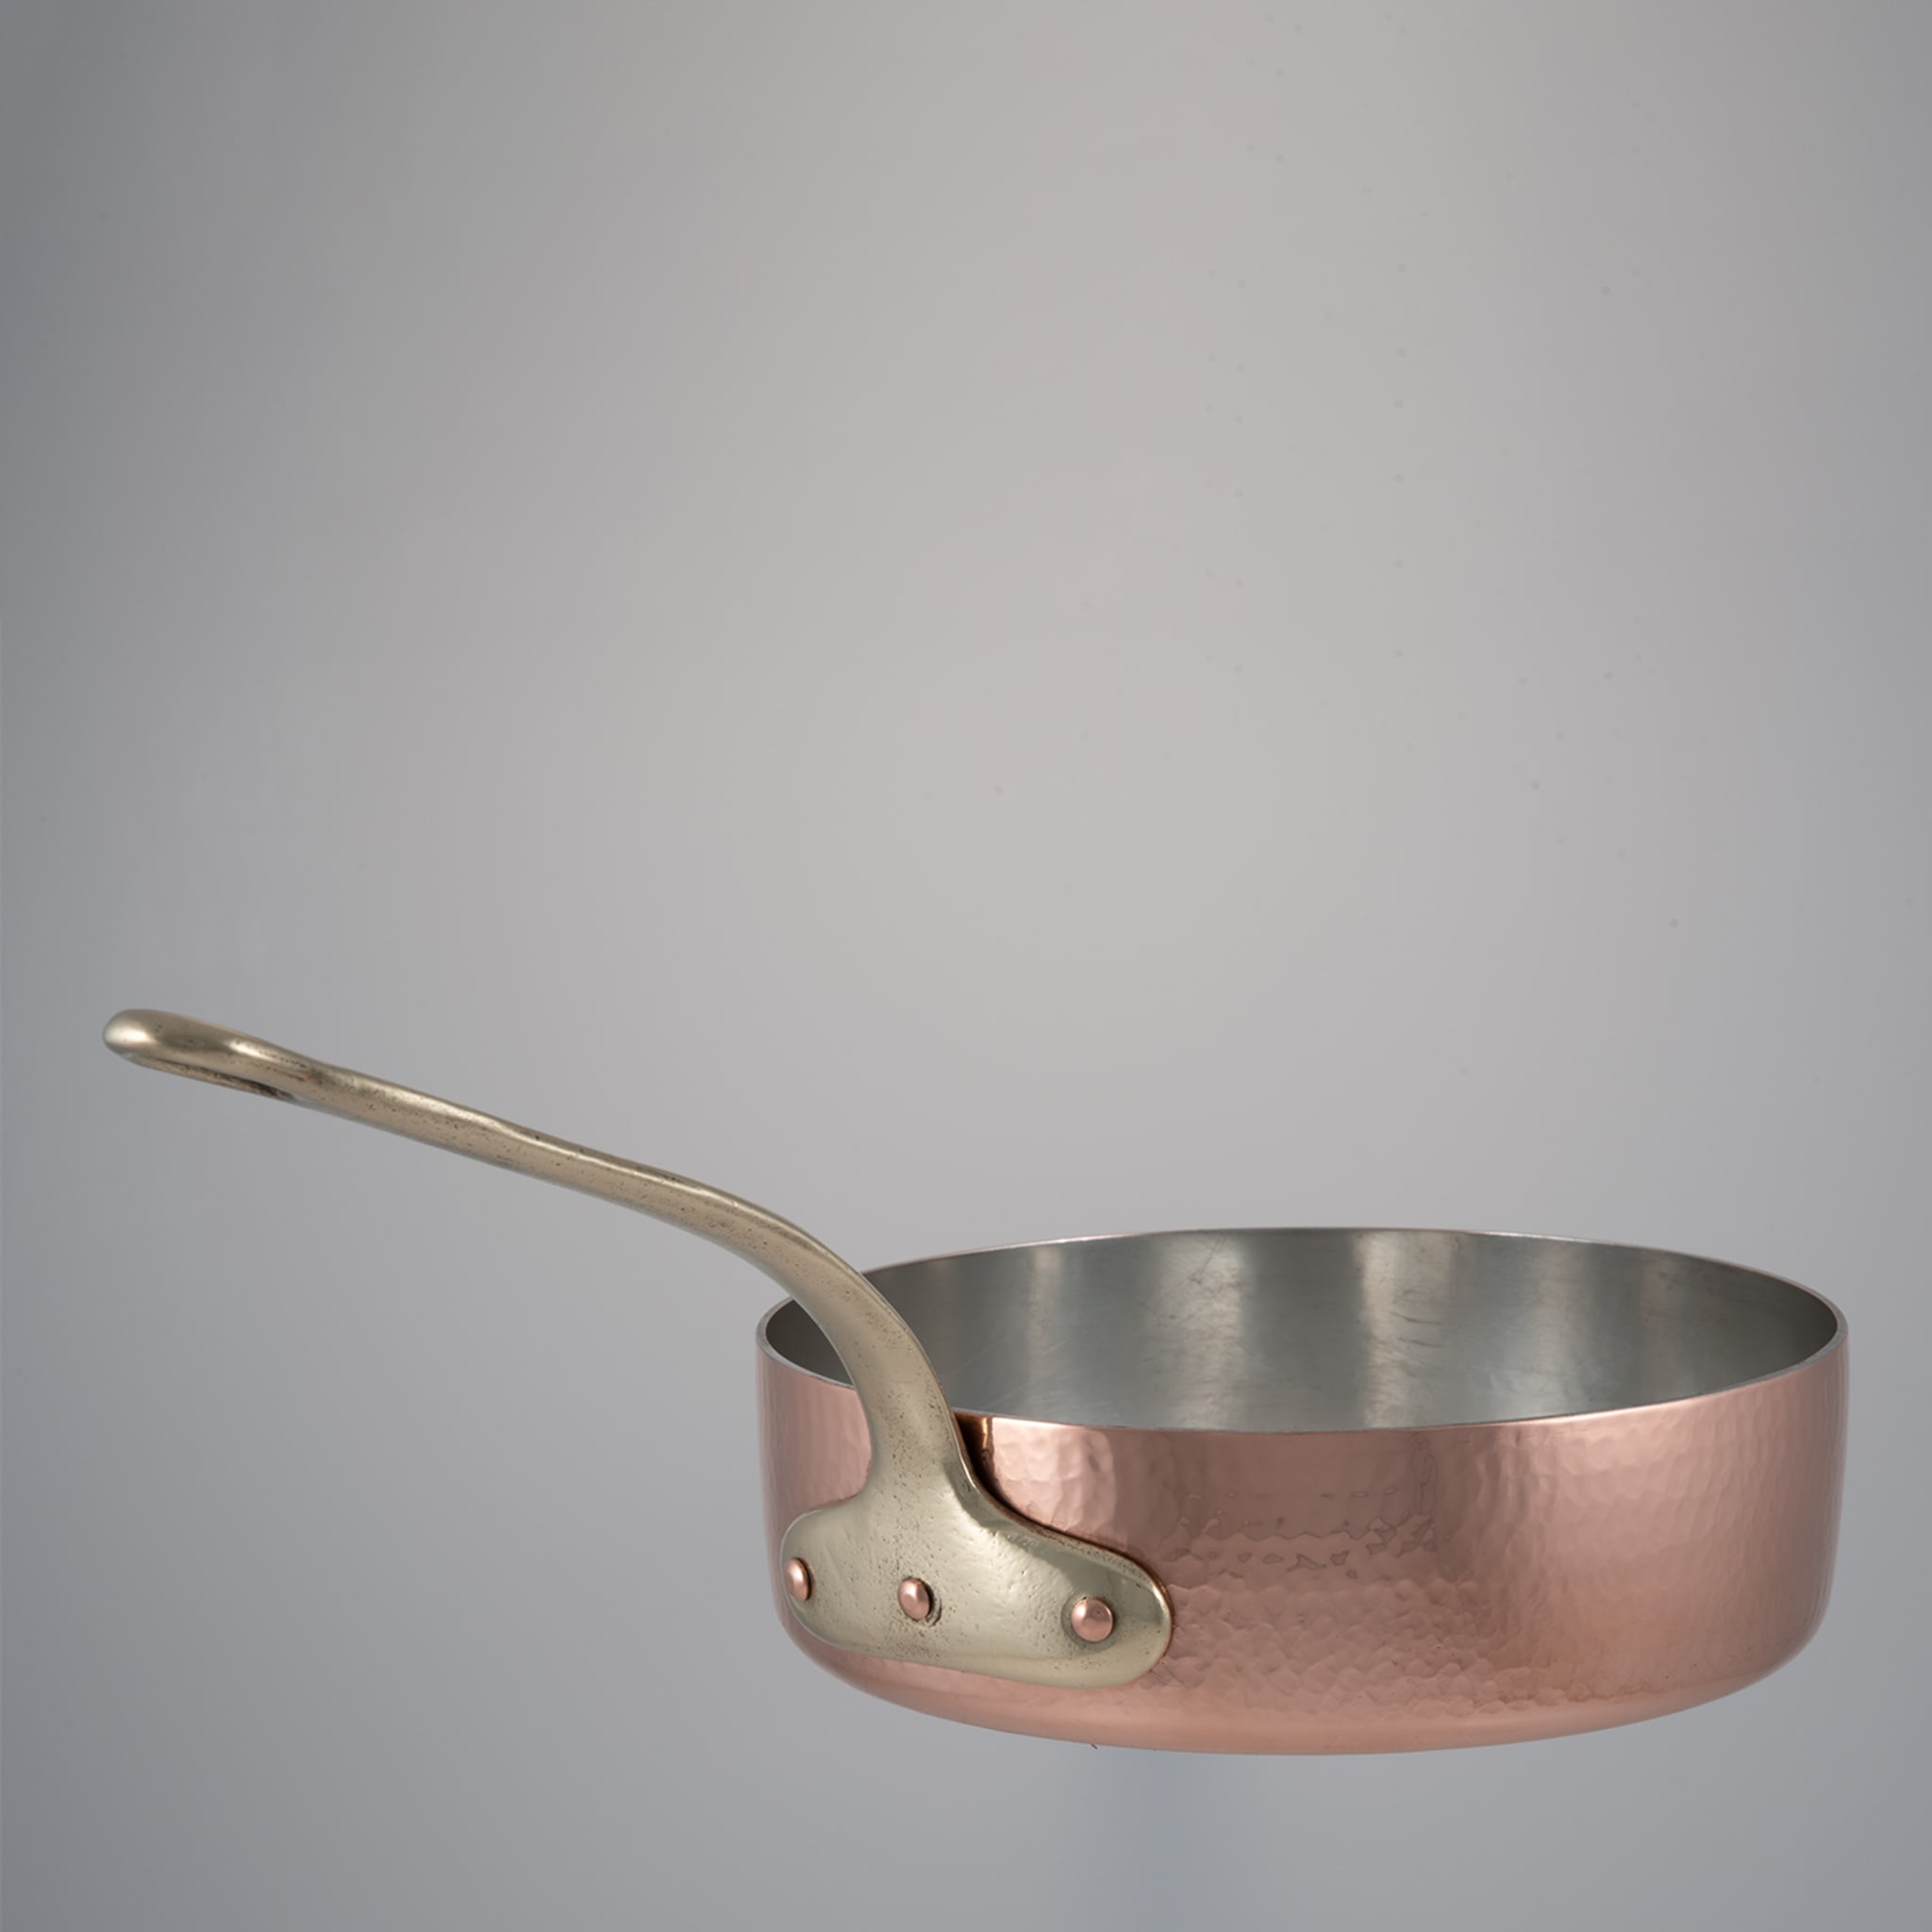 Silver lined Copper Saucepan Dish with Lid #2 - Alternative view 1